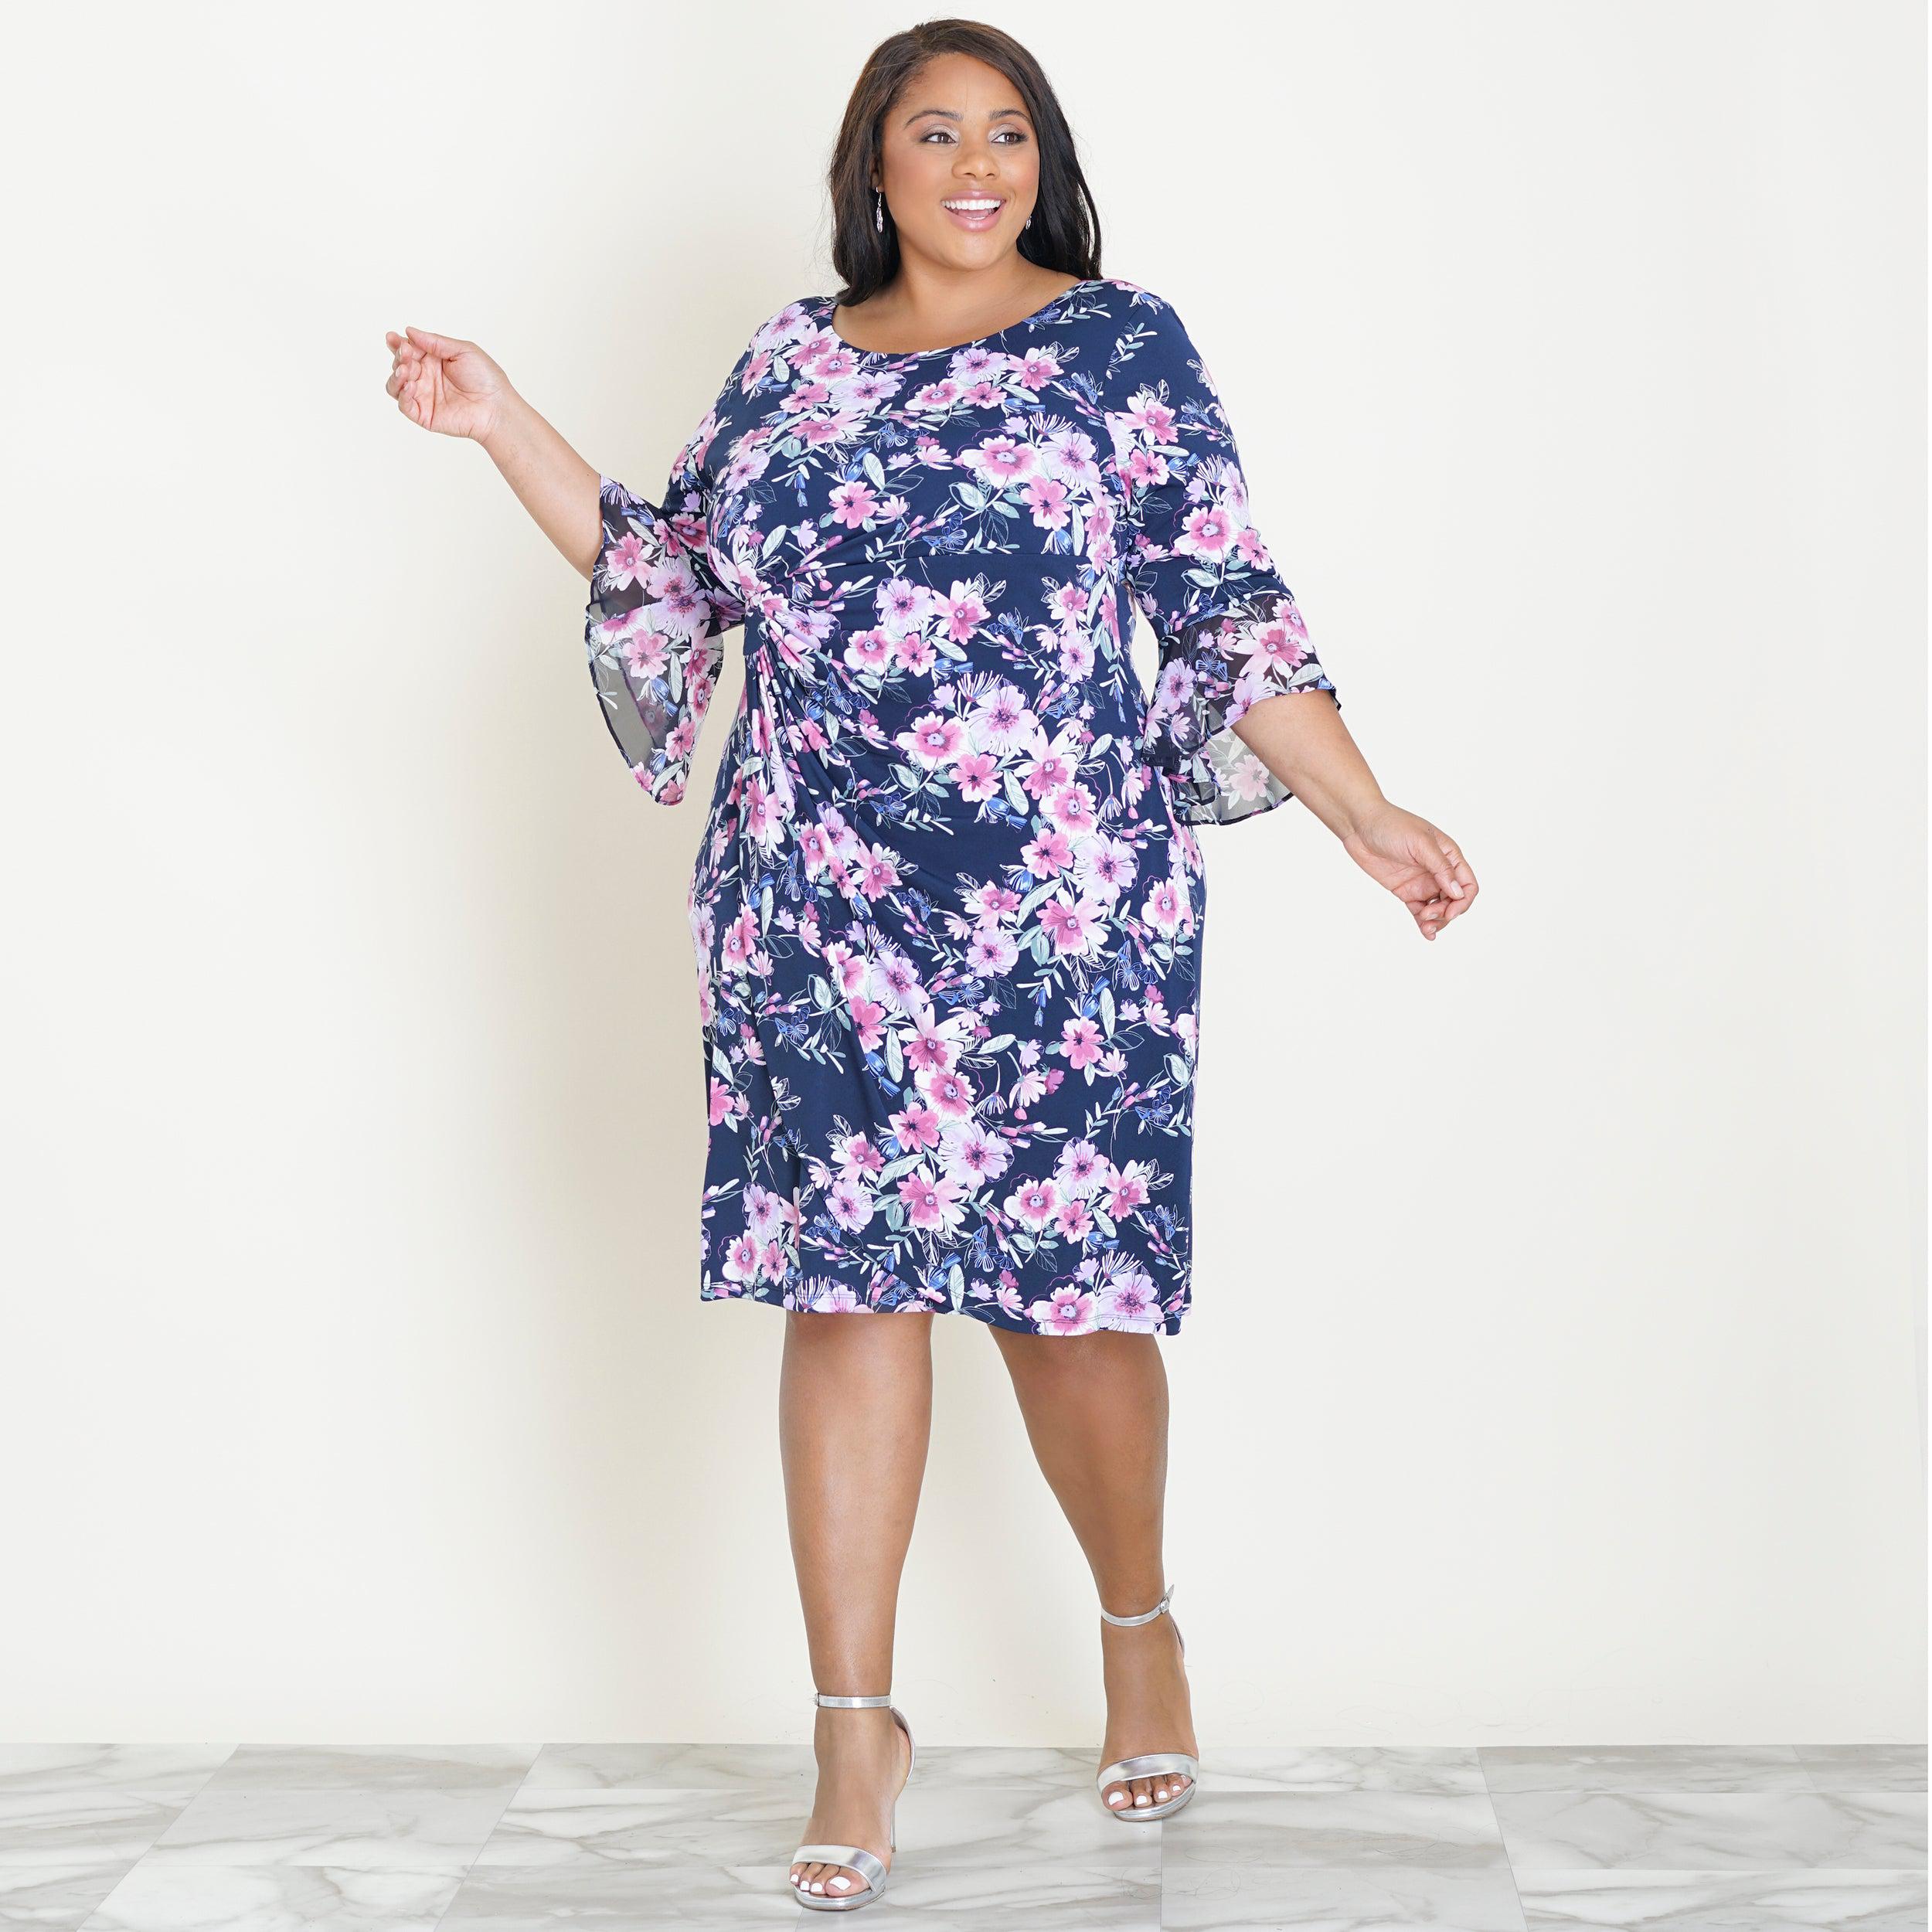 Woman posing wearing Navy/Mauve Lisa 2.0 Navy and Mauve Floral Faux Wrap Dress from Connected Apparel